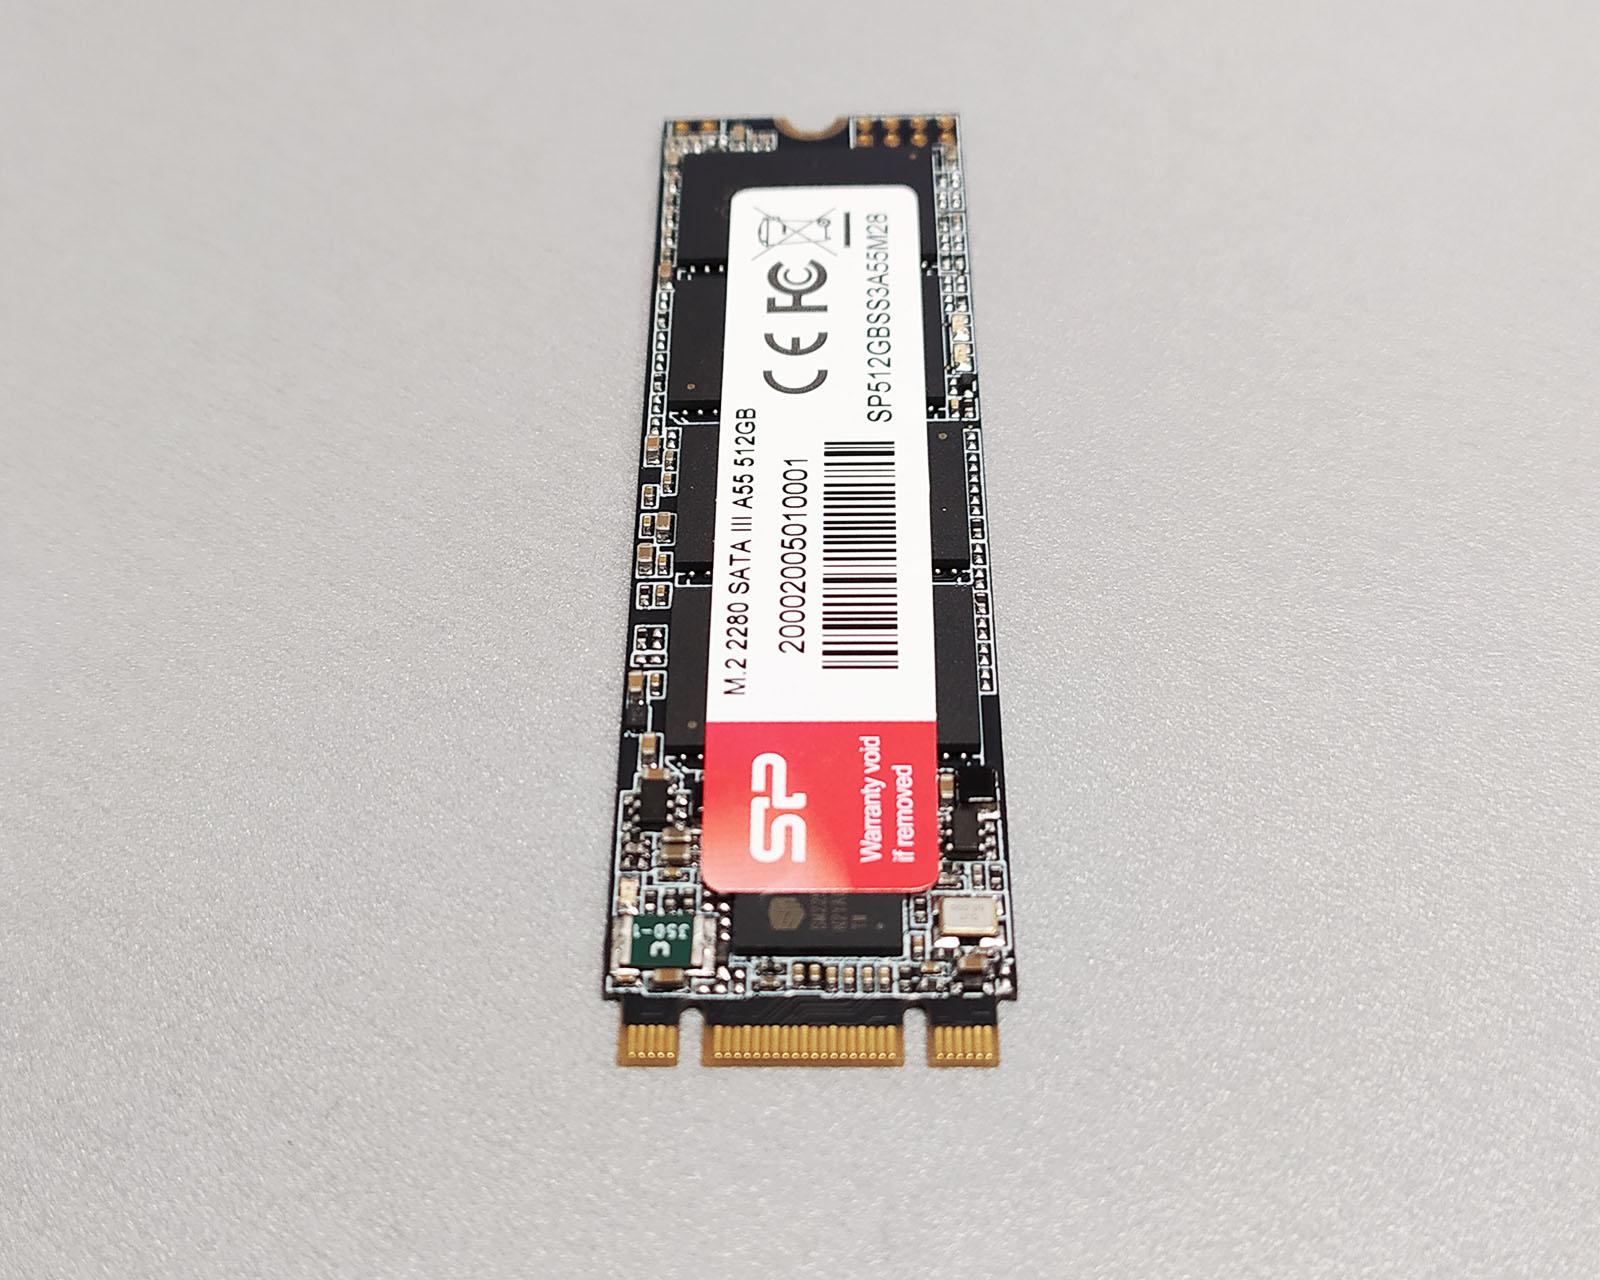 Silicon Power A55 512GB Review - Is It Any Good?